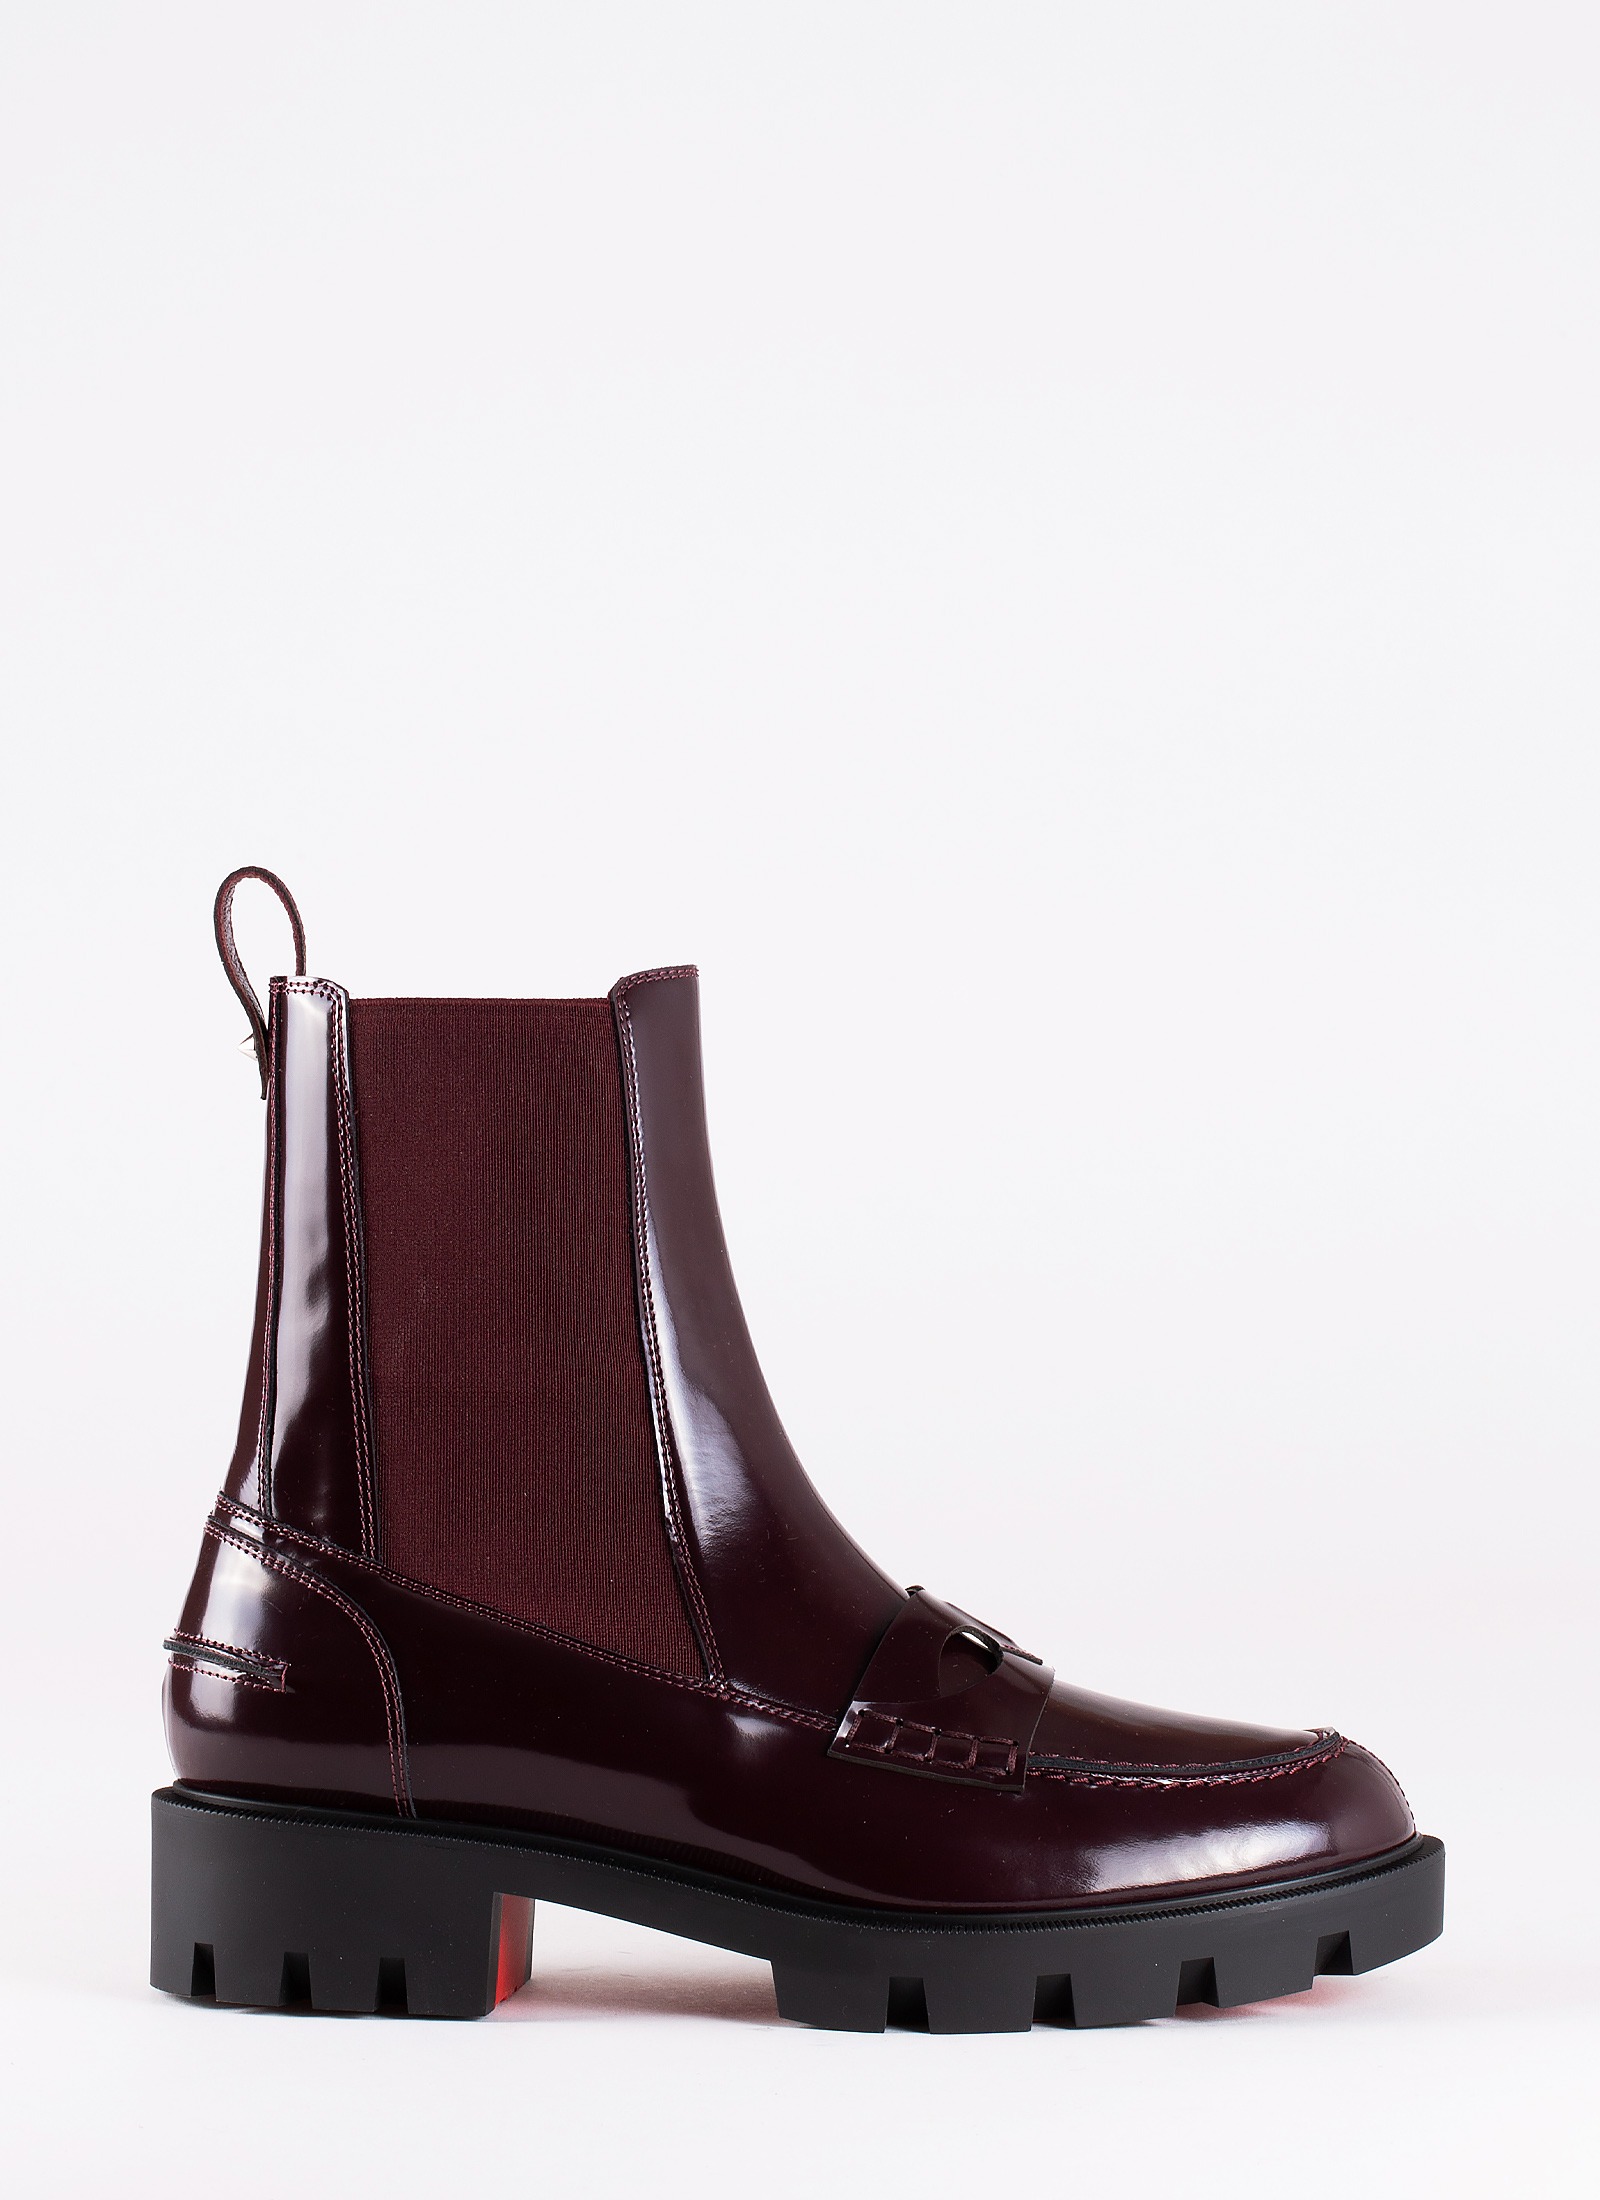 LEATHER CHELSEA BOOTS - CHRISTIAN LOUBOUTIN